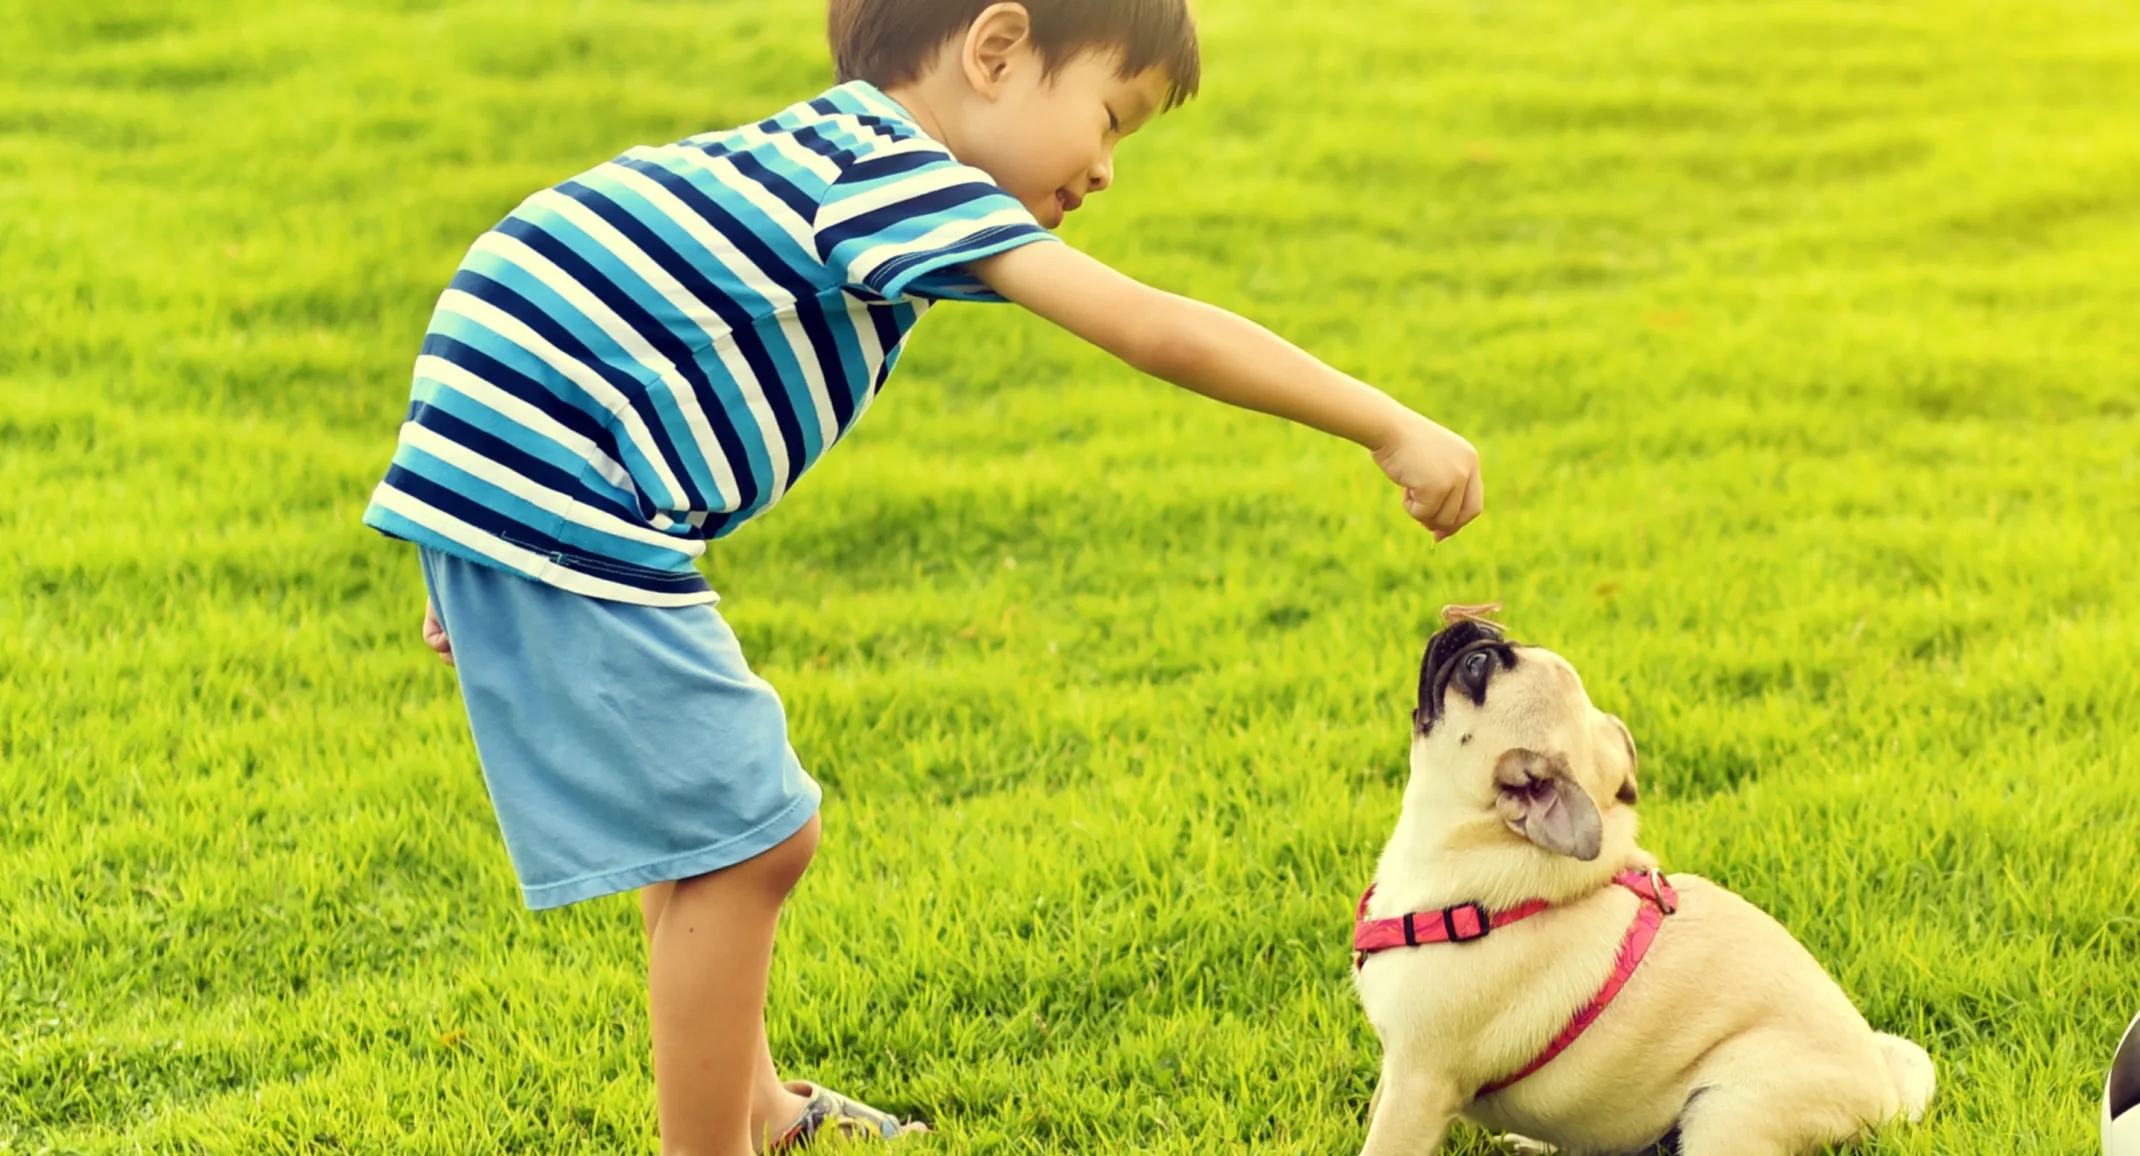 Little brunette boy is playing with his puppy at a park.